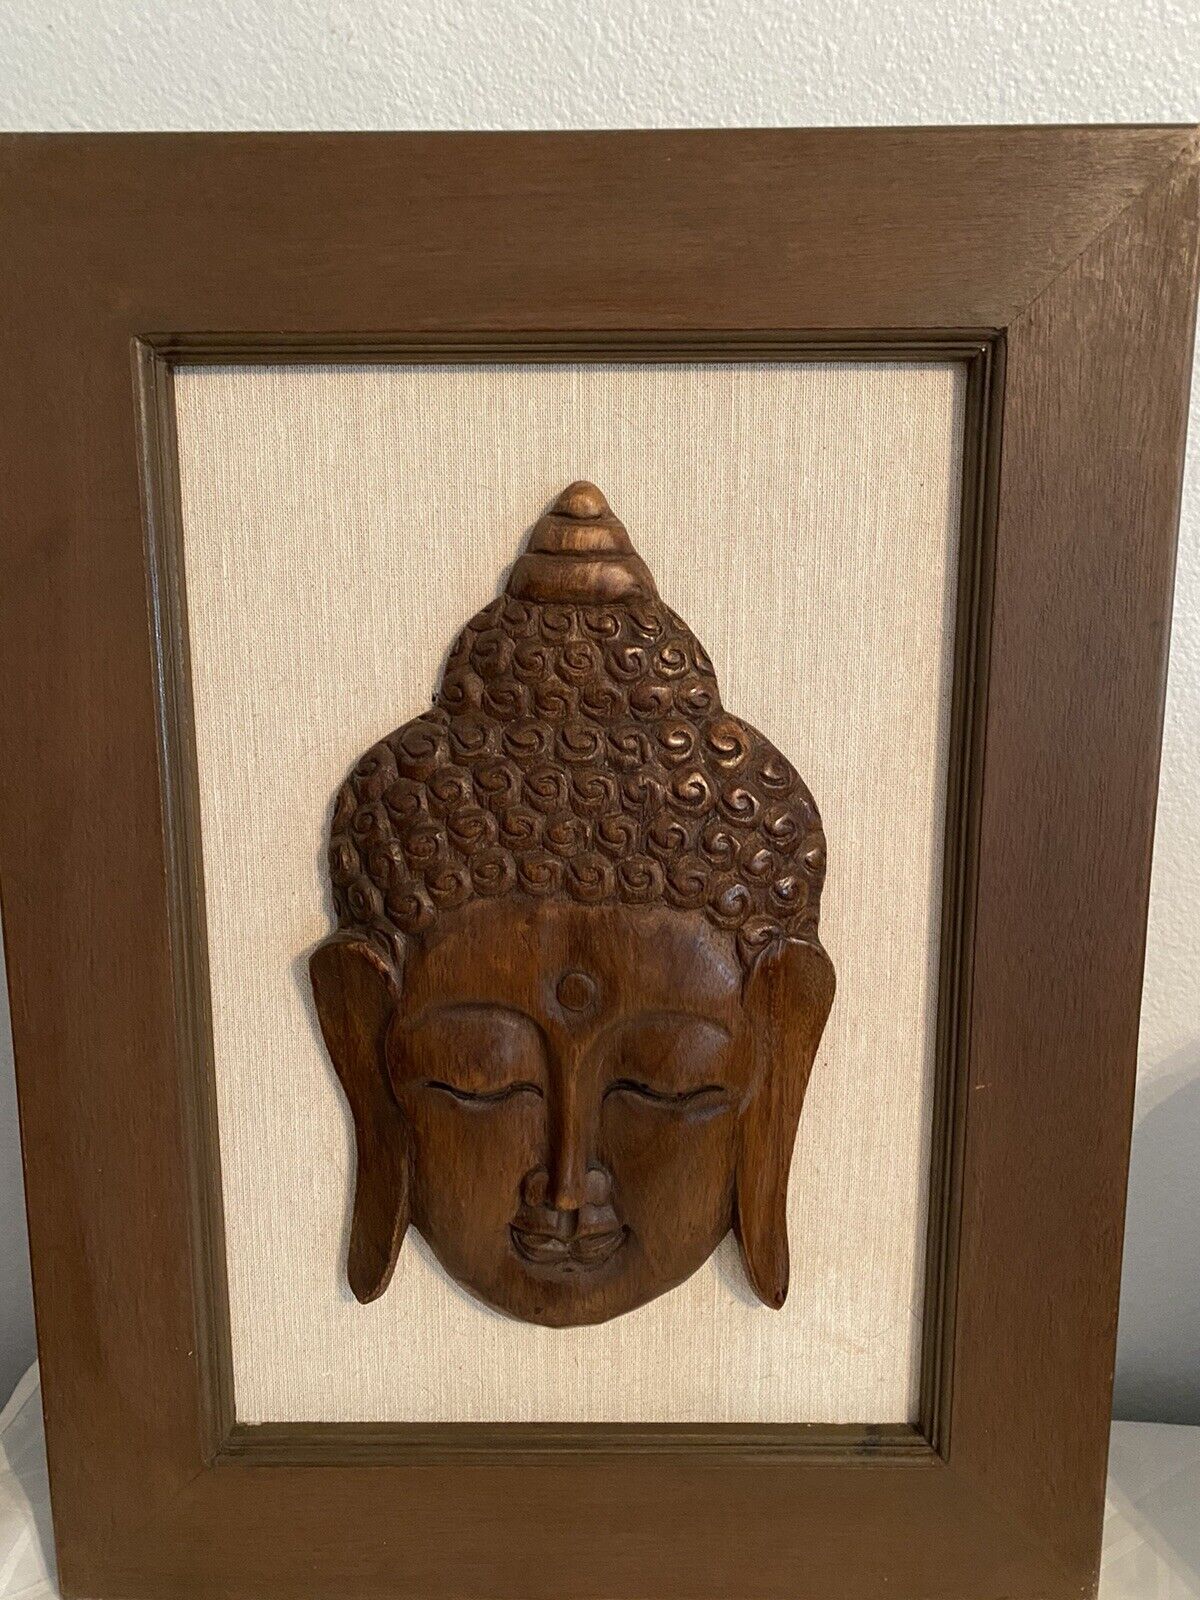 Hand Carved Wooden Buddha Face Framed Solid Wood 8 Lbs, 24x18, Face 14x8.5